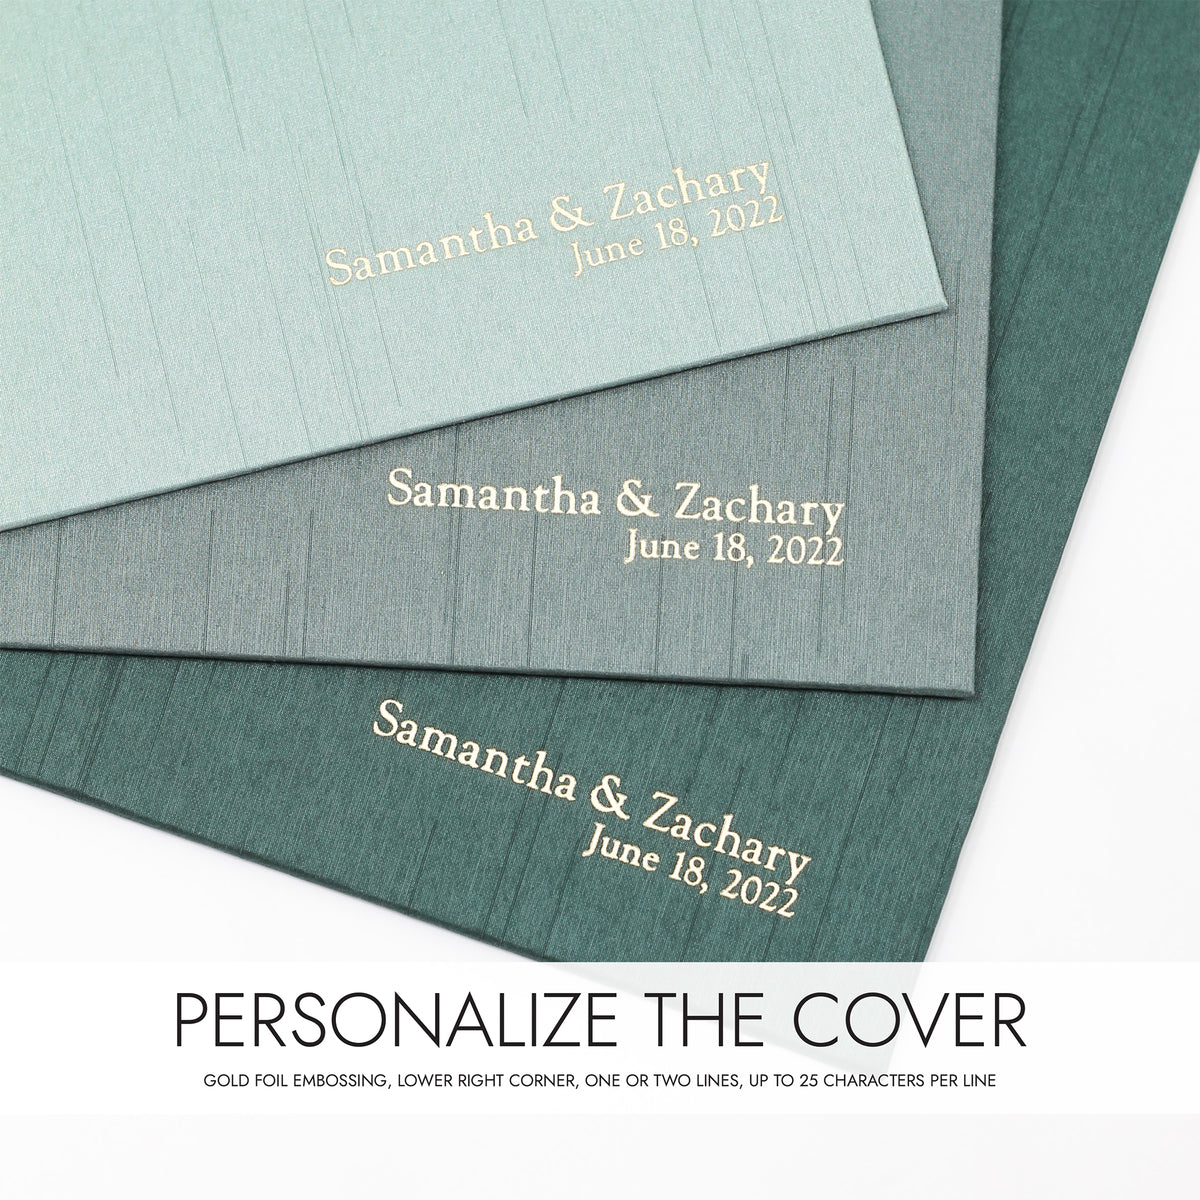 Event Guestbook Embossed with “Guests” | Cover: Garnet Silk | Available Personalized